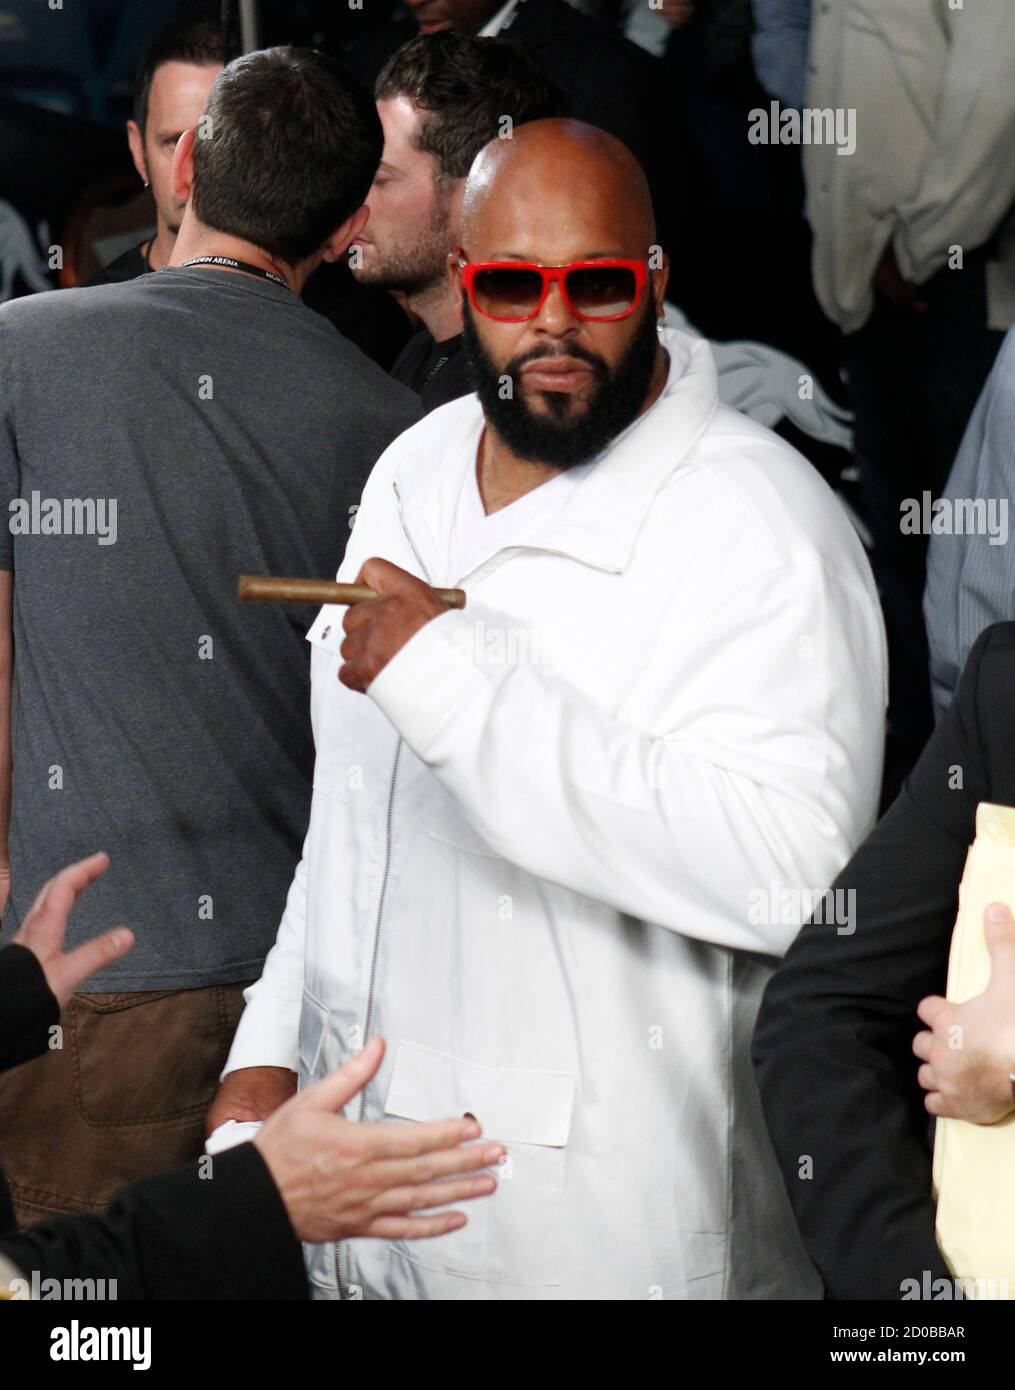 CEO of Black Kapital Records Suge Knight is seen following the Miguel Cotto and Floyd Mayweather Jr. title fight at the MGM Grand Garden Arena in Las Vegas, Nevada May 5, 2012. REUTERS/Steve Marcus (UNITED STATES - Tags: SPORT BOXING ENTERTAINMENT) Stock Photo